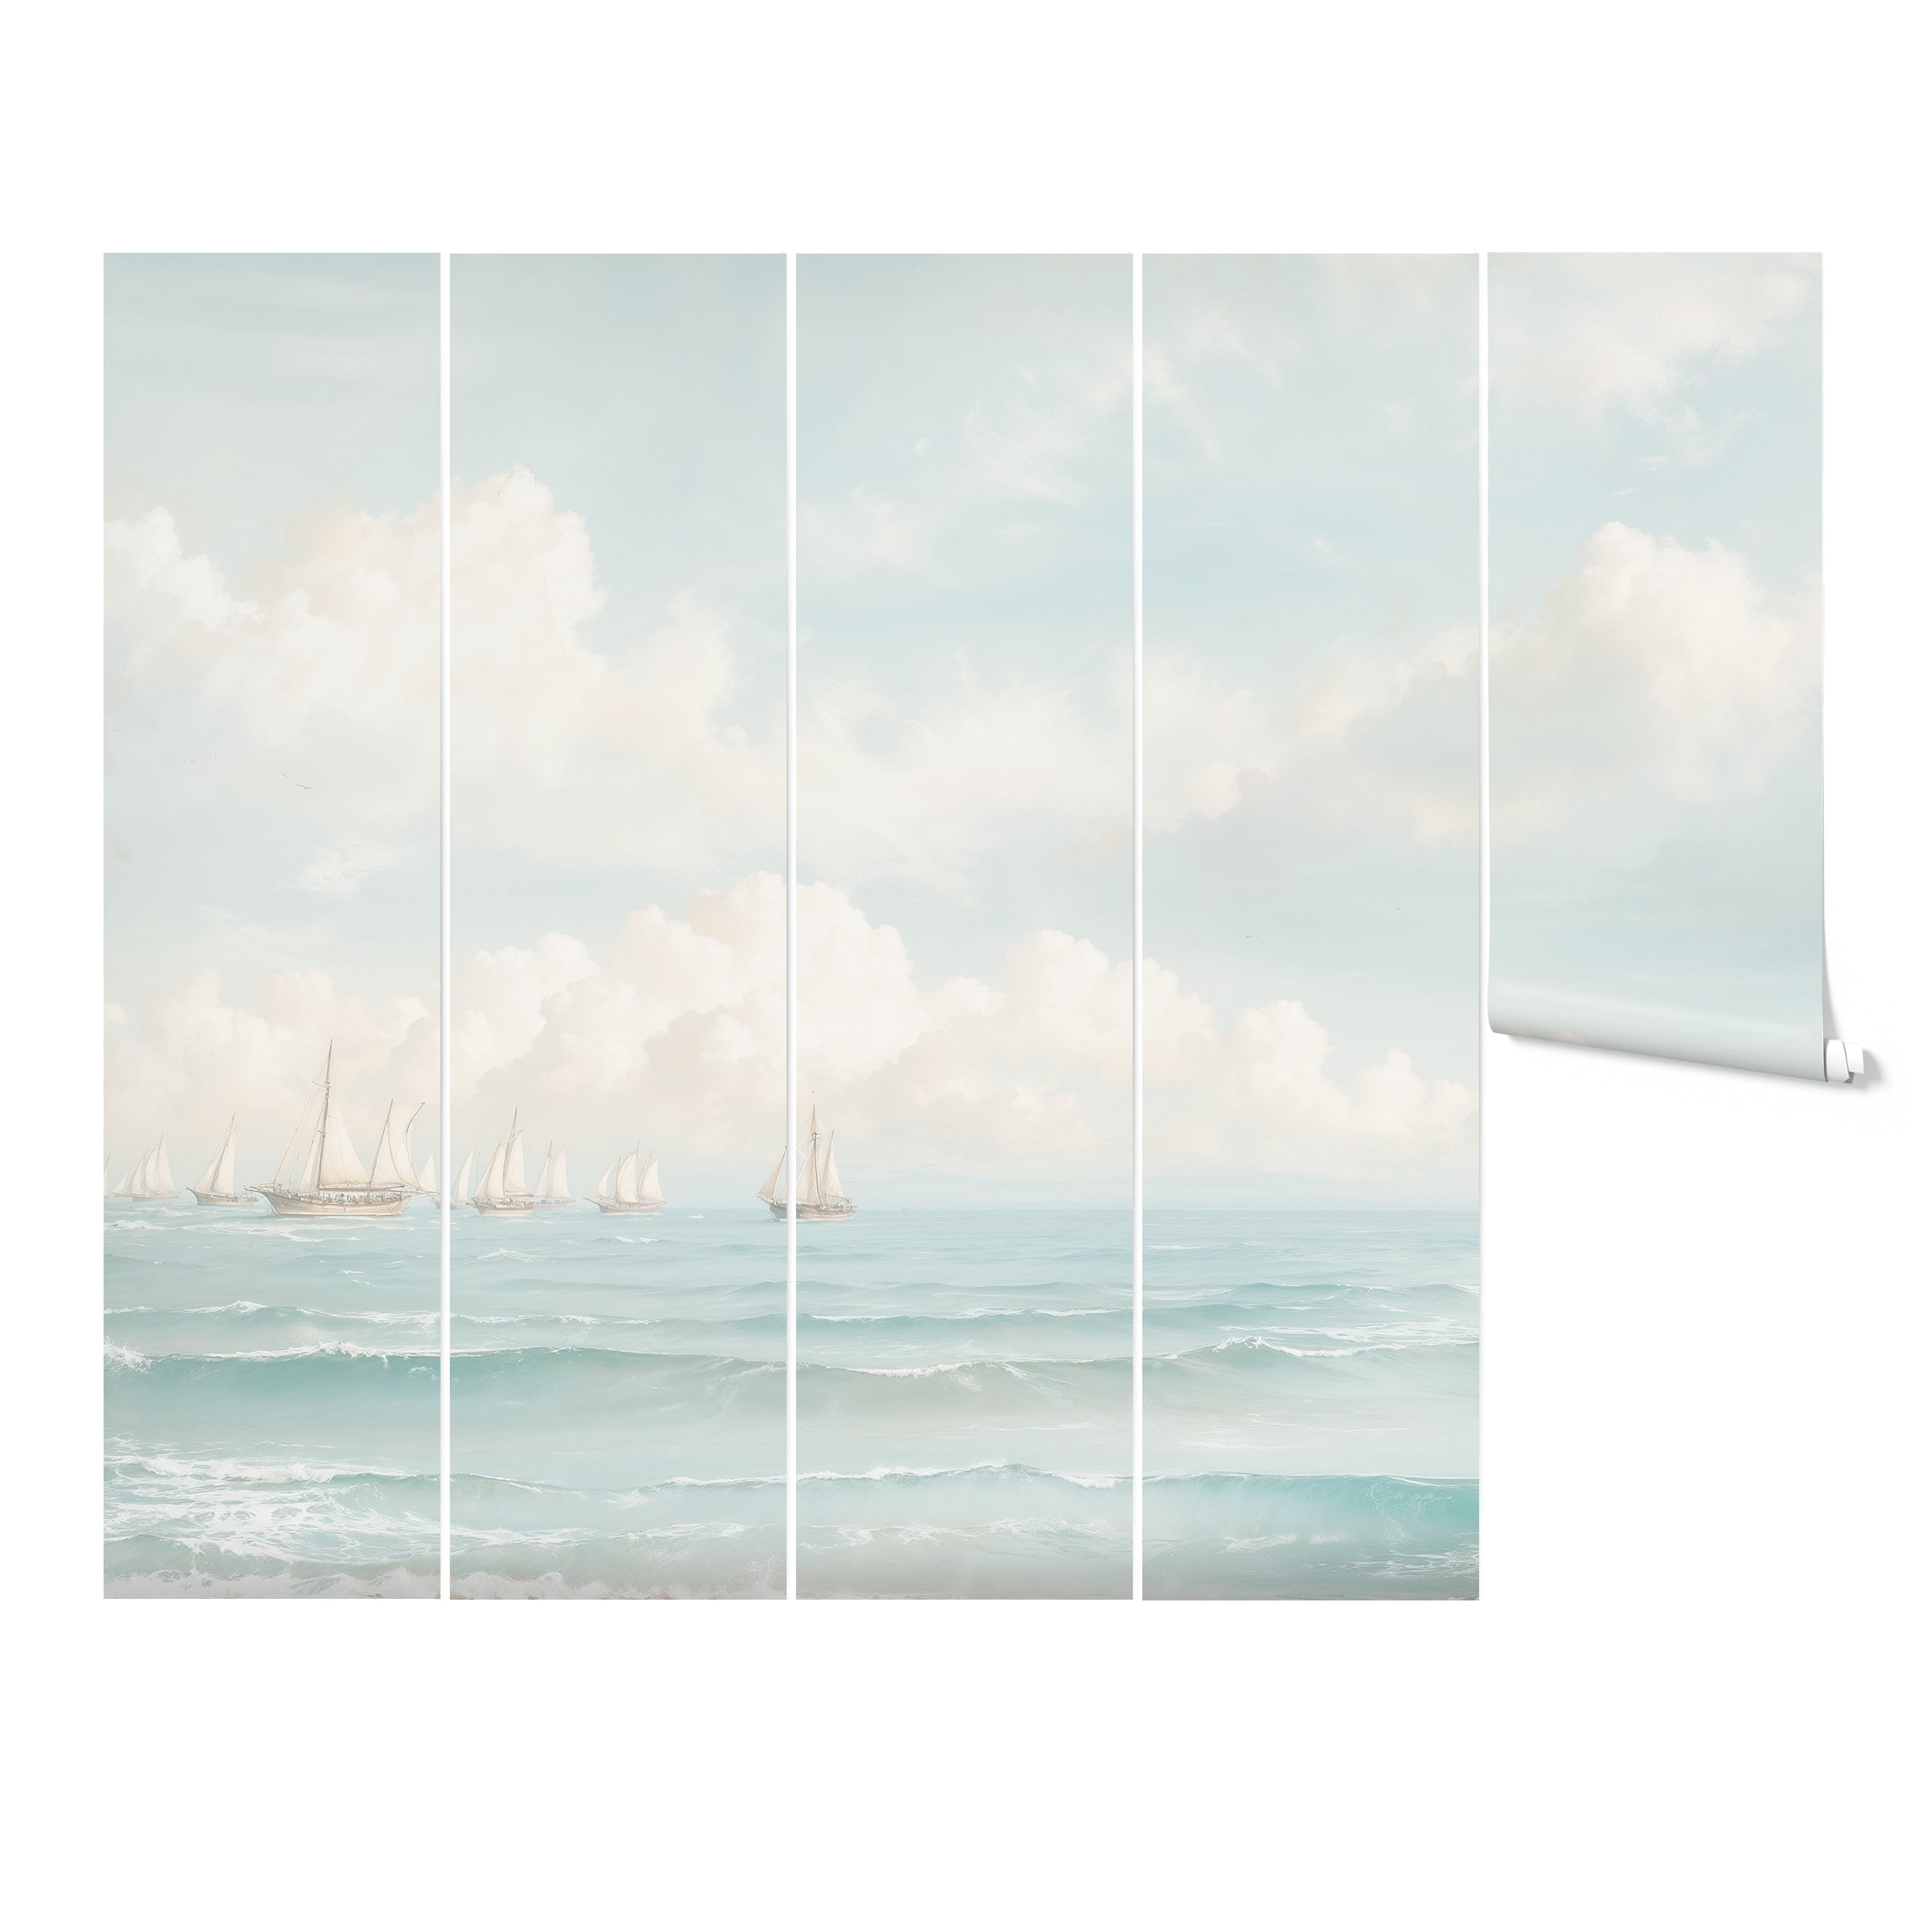 An artistic depiction of a seascape mural segmented into vertical panels, each featuring sailboats on a tranquil sea under a cloudy sky. The image also shows a rolled-up version of the mural, emphasizing its design flexibility.